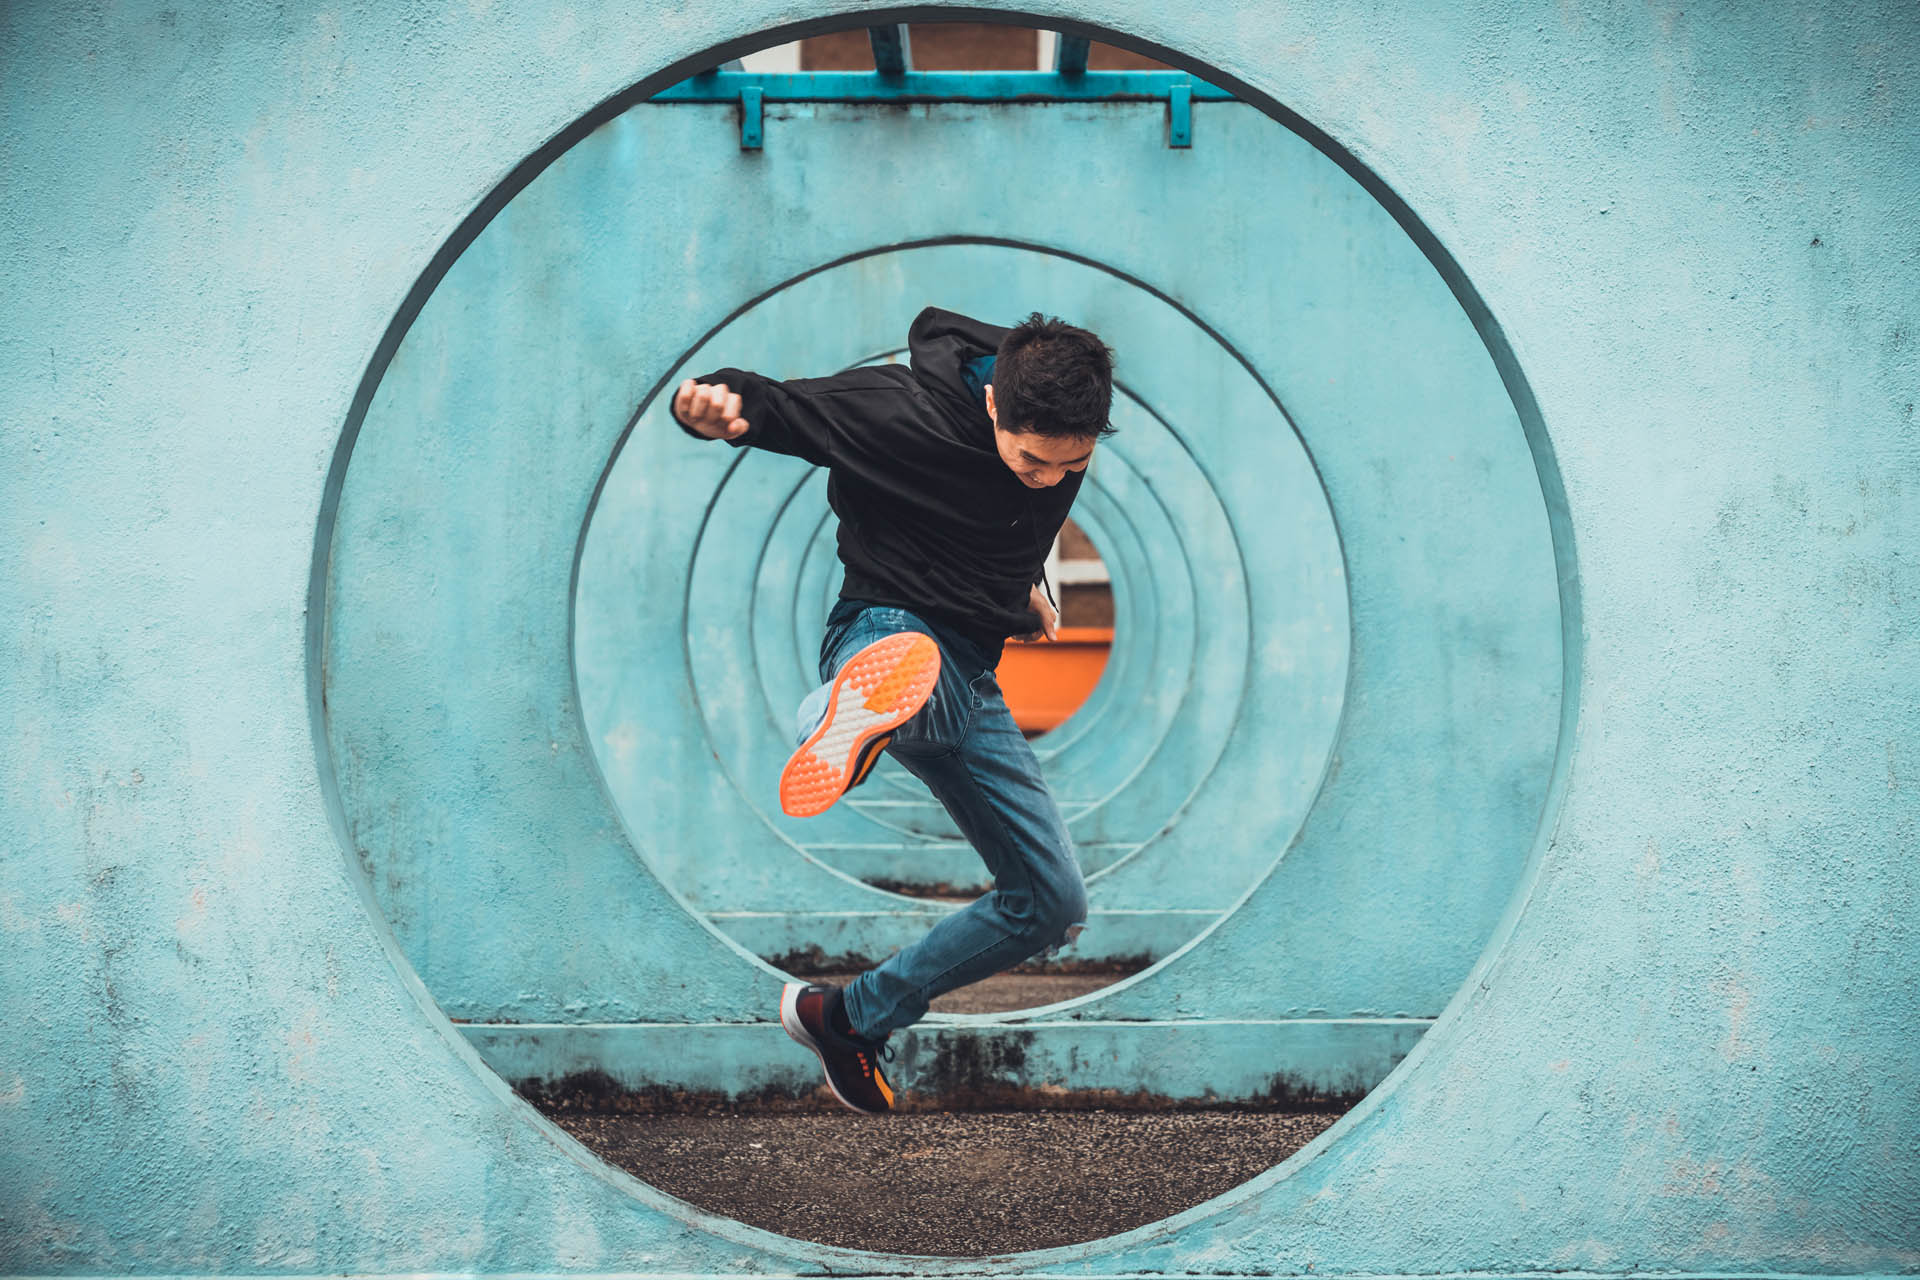 Young Asian active man in action of jumping and kicking, circle looping wall background. Extreme sport activity, parkour outdoor free running, or healthy lifestyle concept